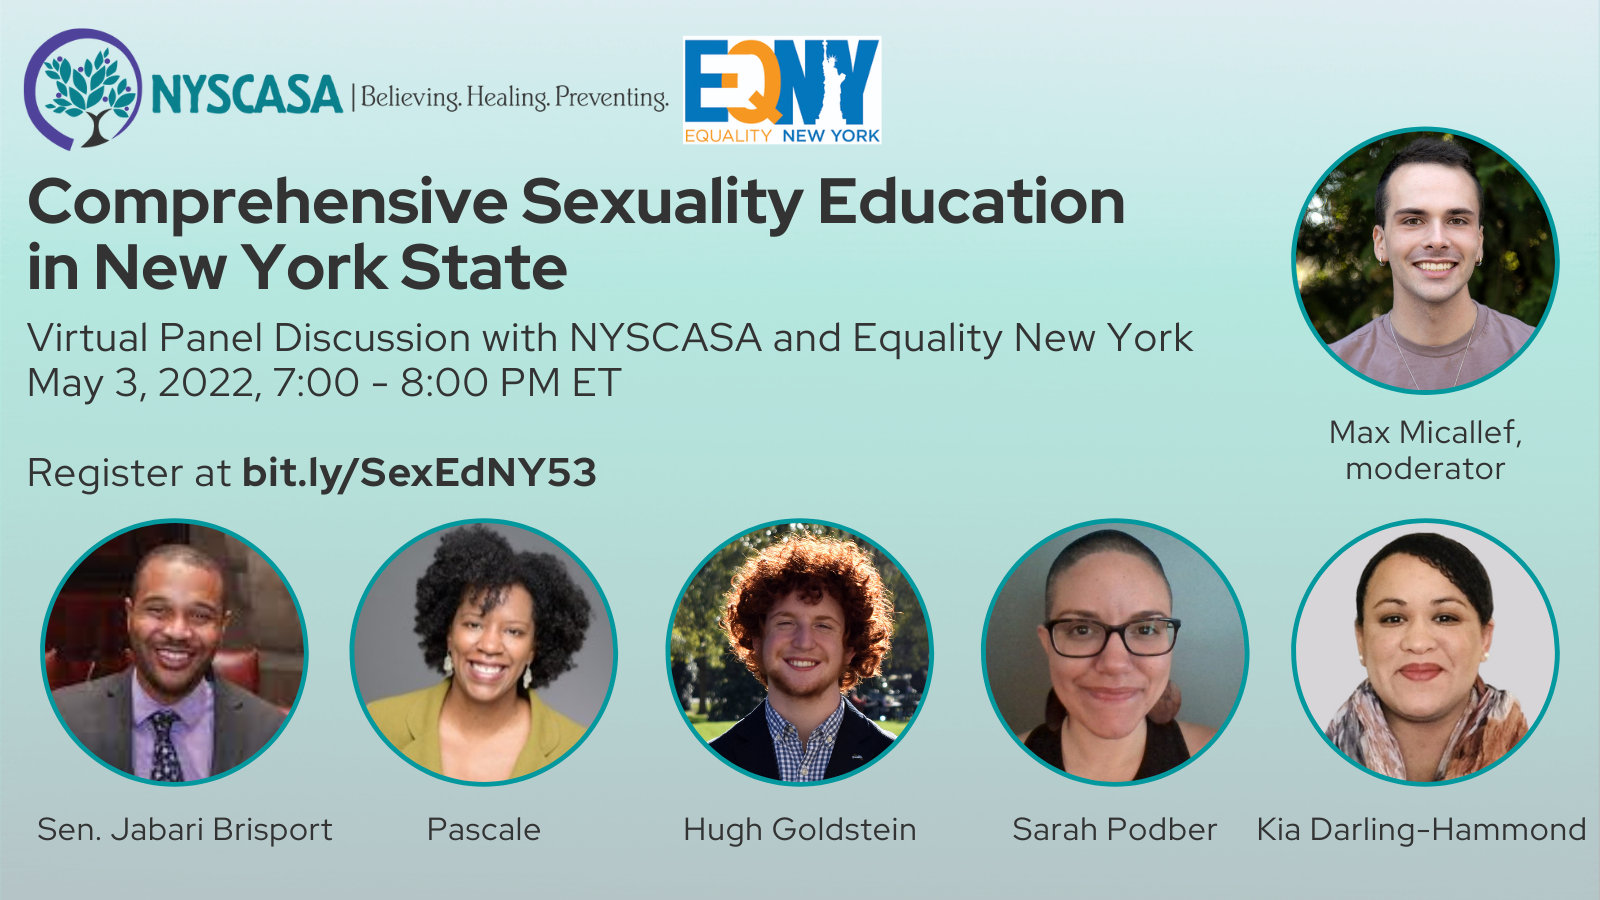 In Case You Missed It: Virtual Panel Discussion on Comprehensive Sexuality Education in New York State